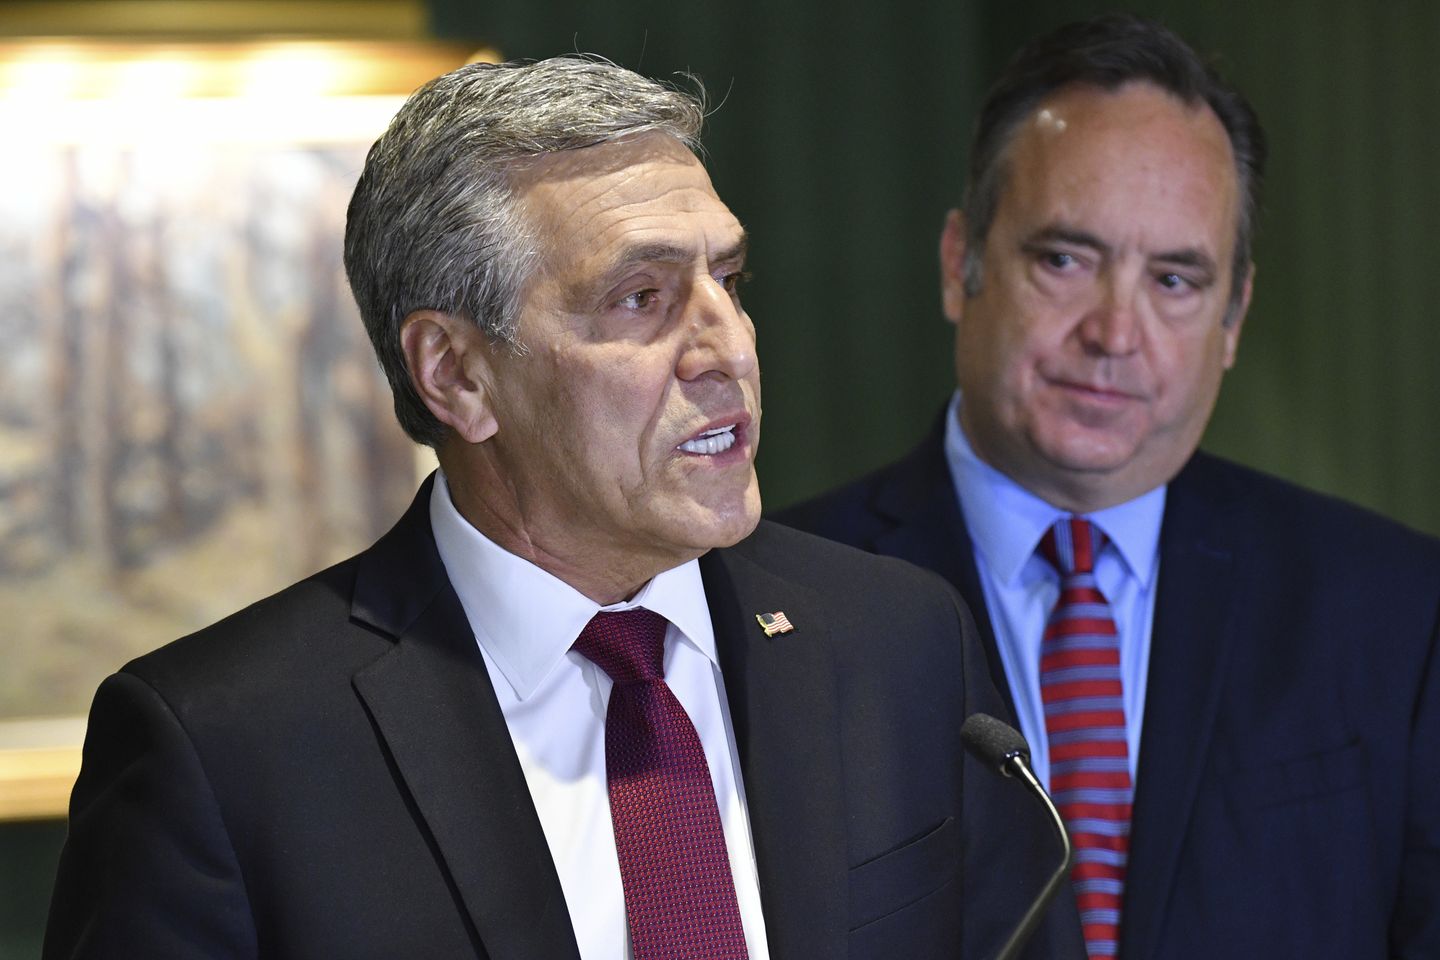 GOP rallies behind Lou Barletta in Pennsylvania governor's race to prevent defeat in November